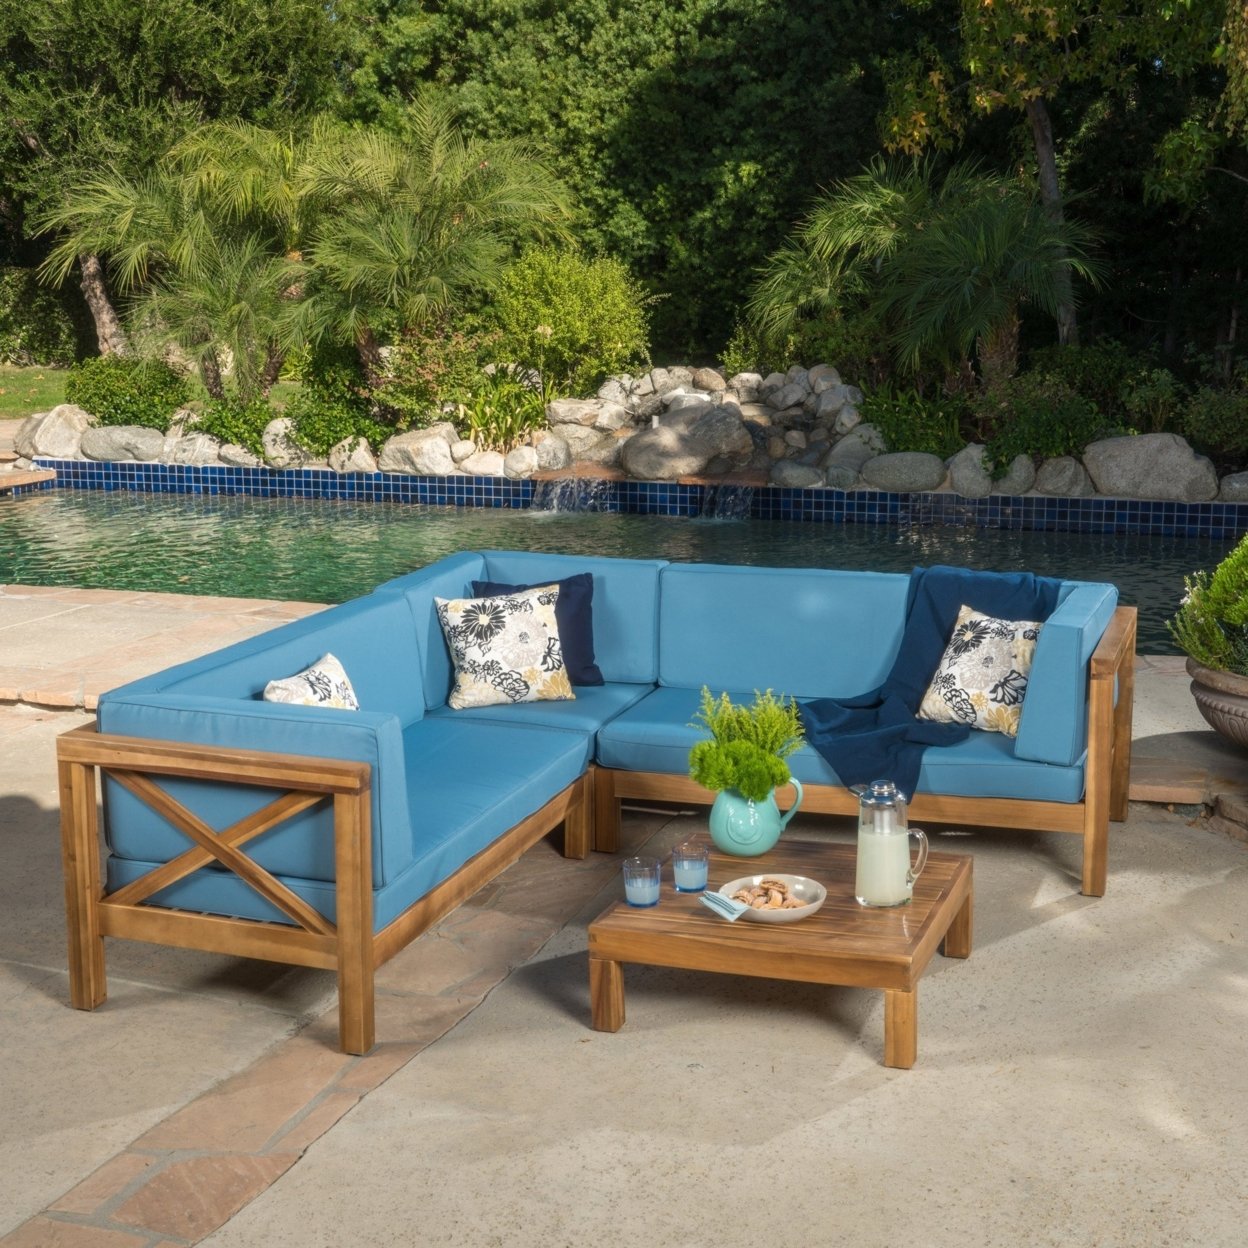 Brava Outdoor 4 Piece V-Shaped Acacia Wood Sectional Sofa And Coffee Table Set - Beige, Natural